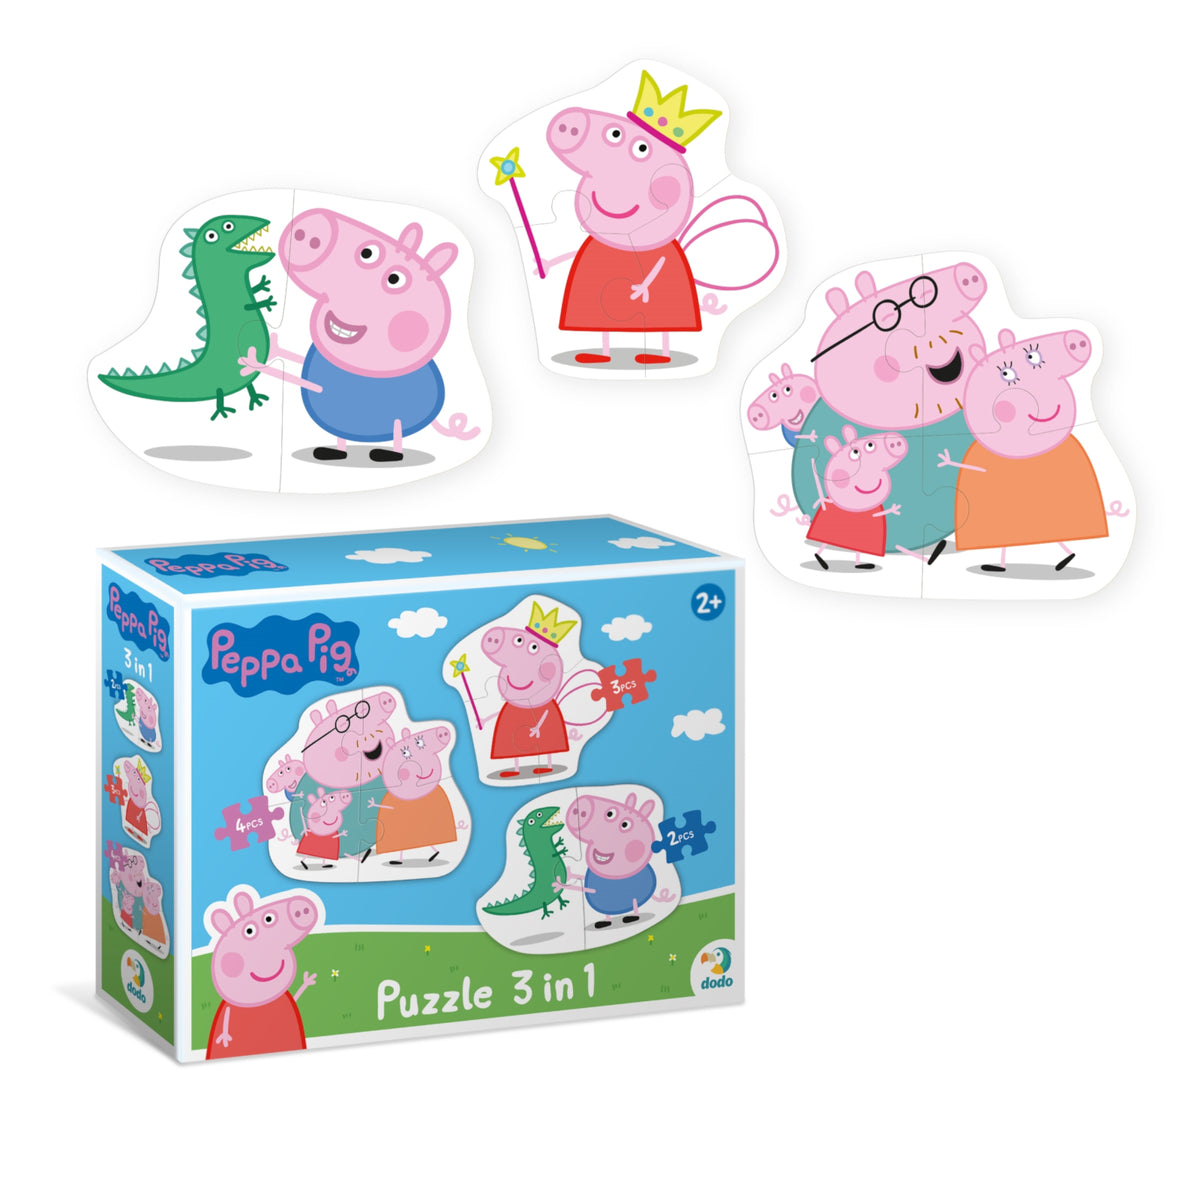 DODO Puzzle 3in1 Peppa Pig Familie 24M+